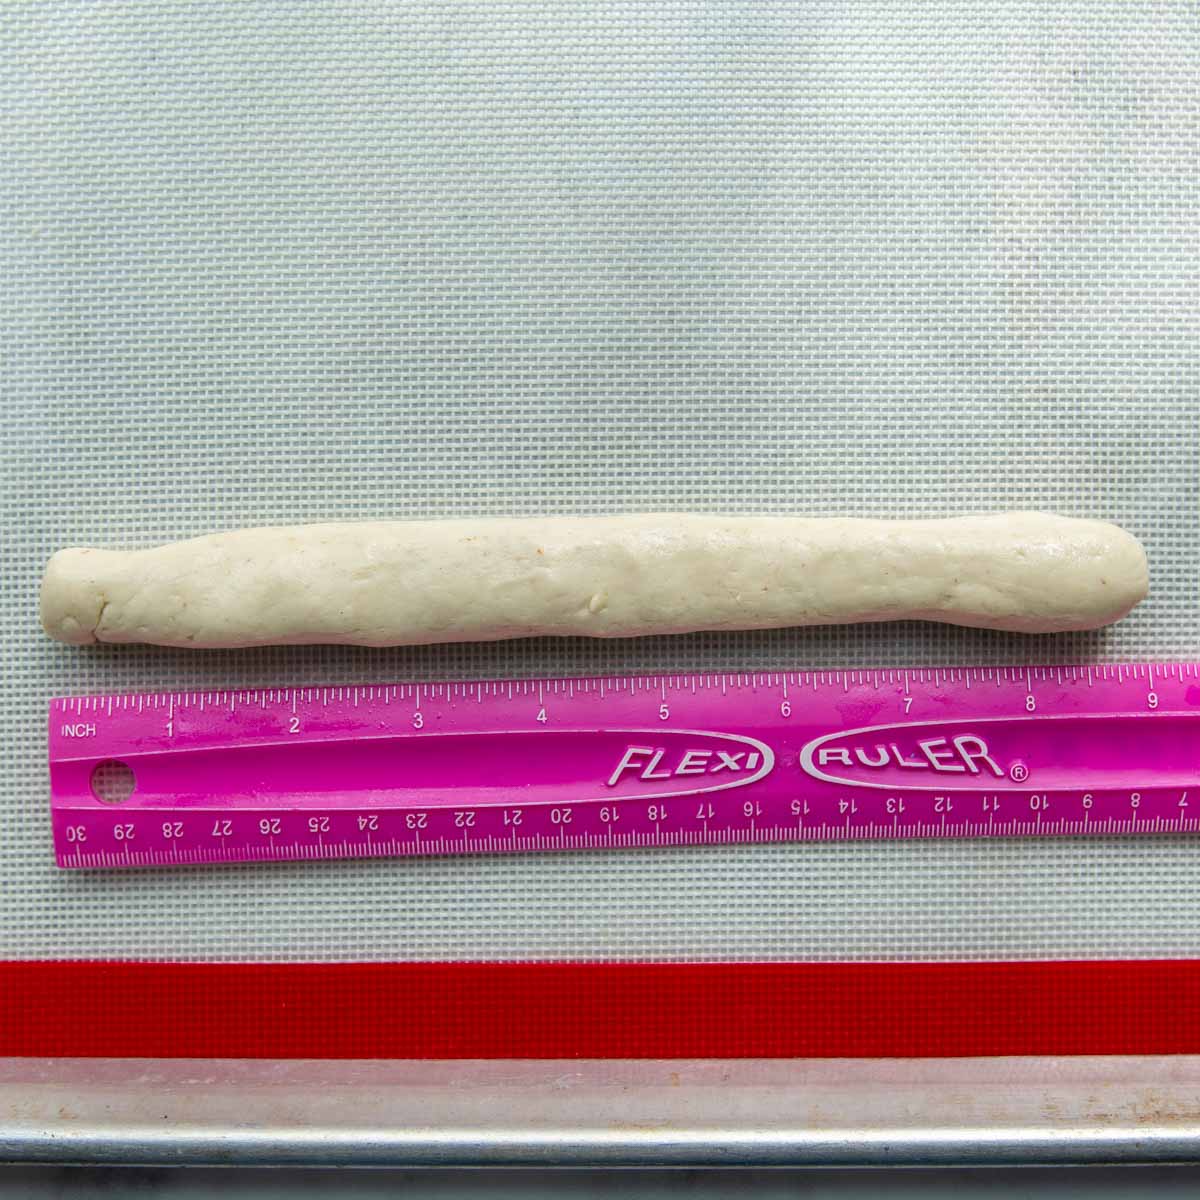 the dough rolled out into a rope with a ruler next to it.